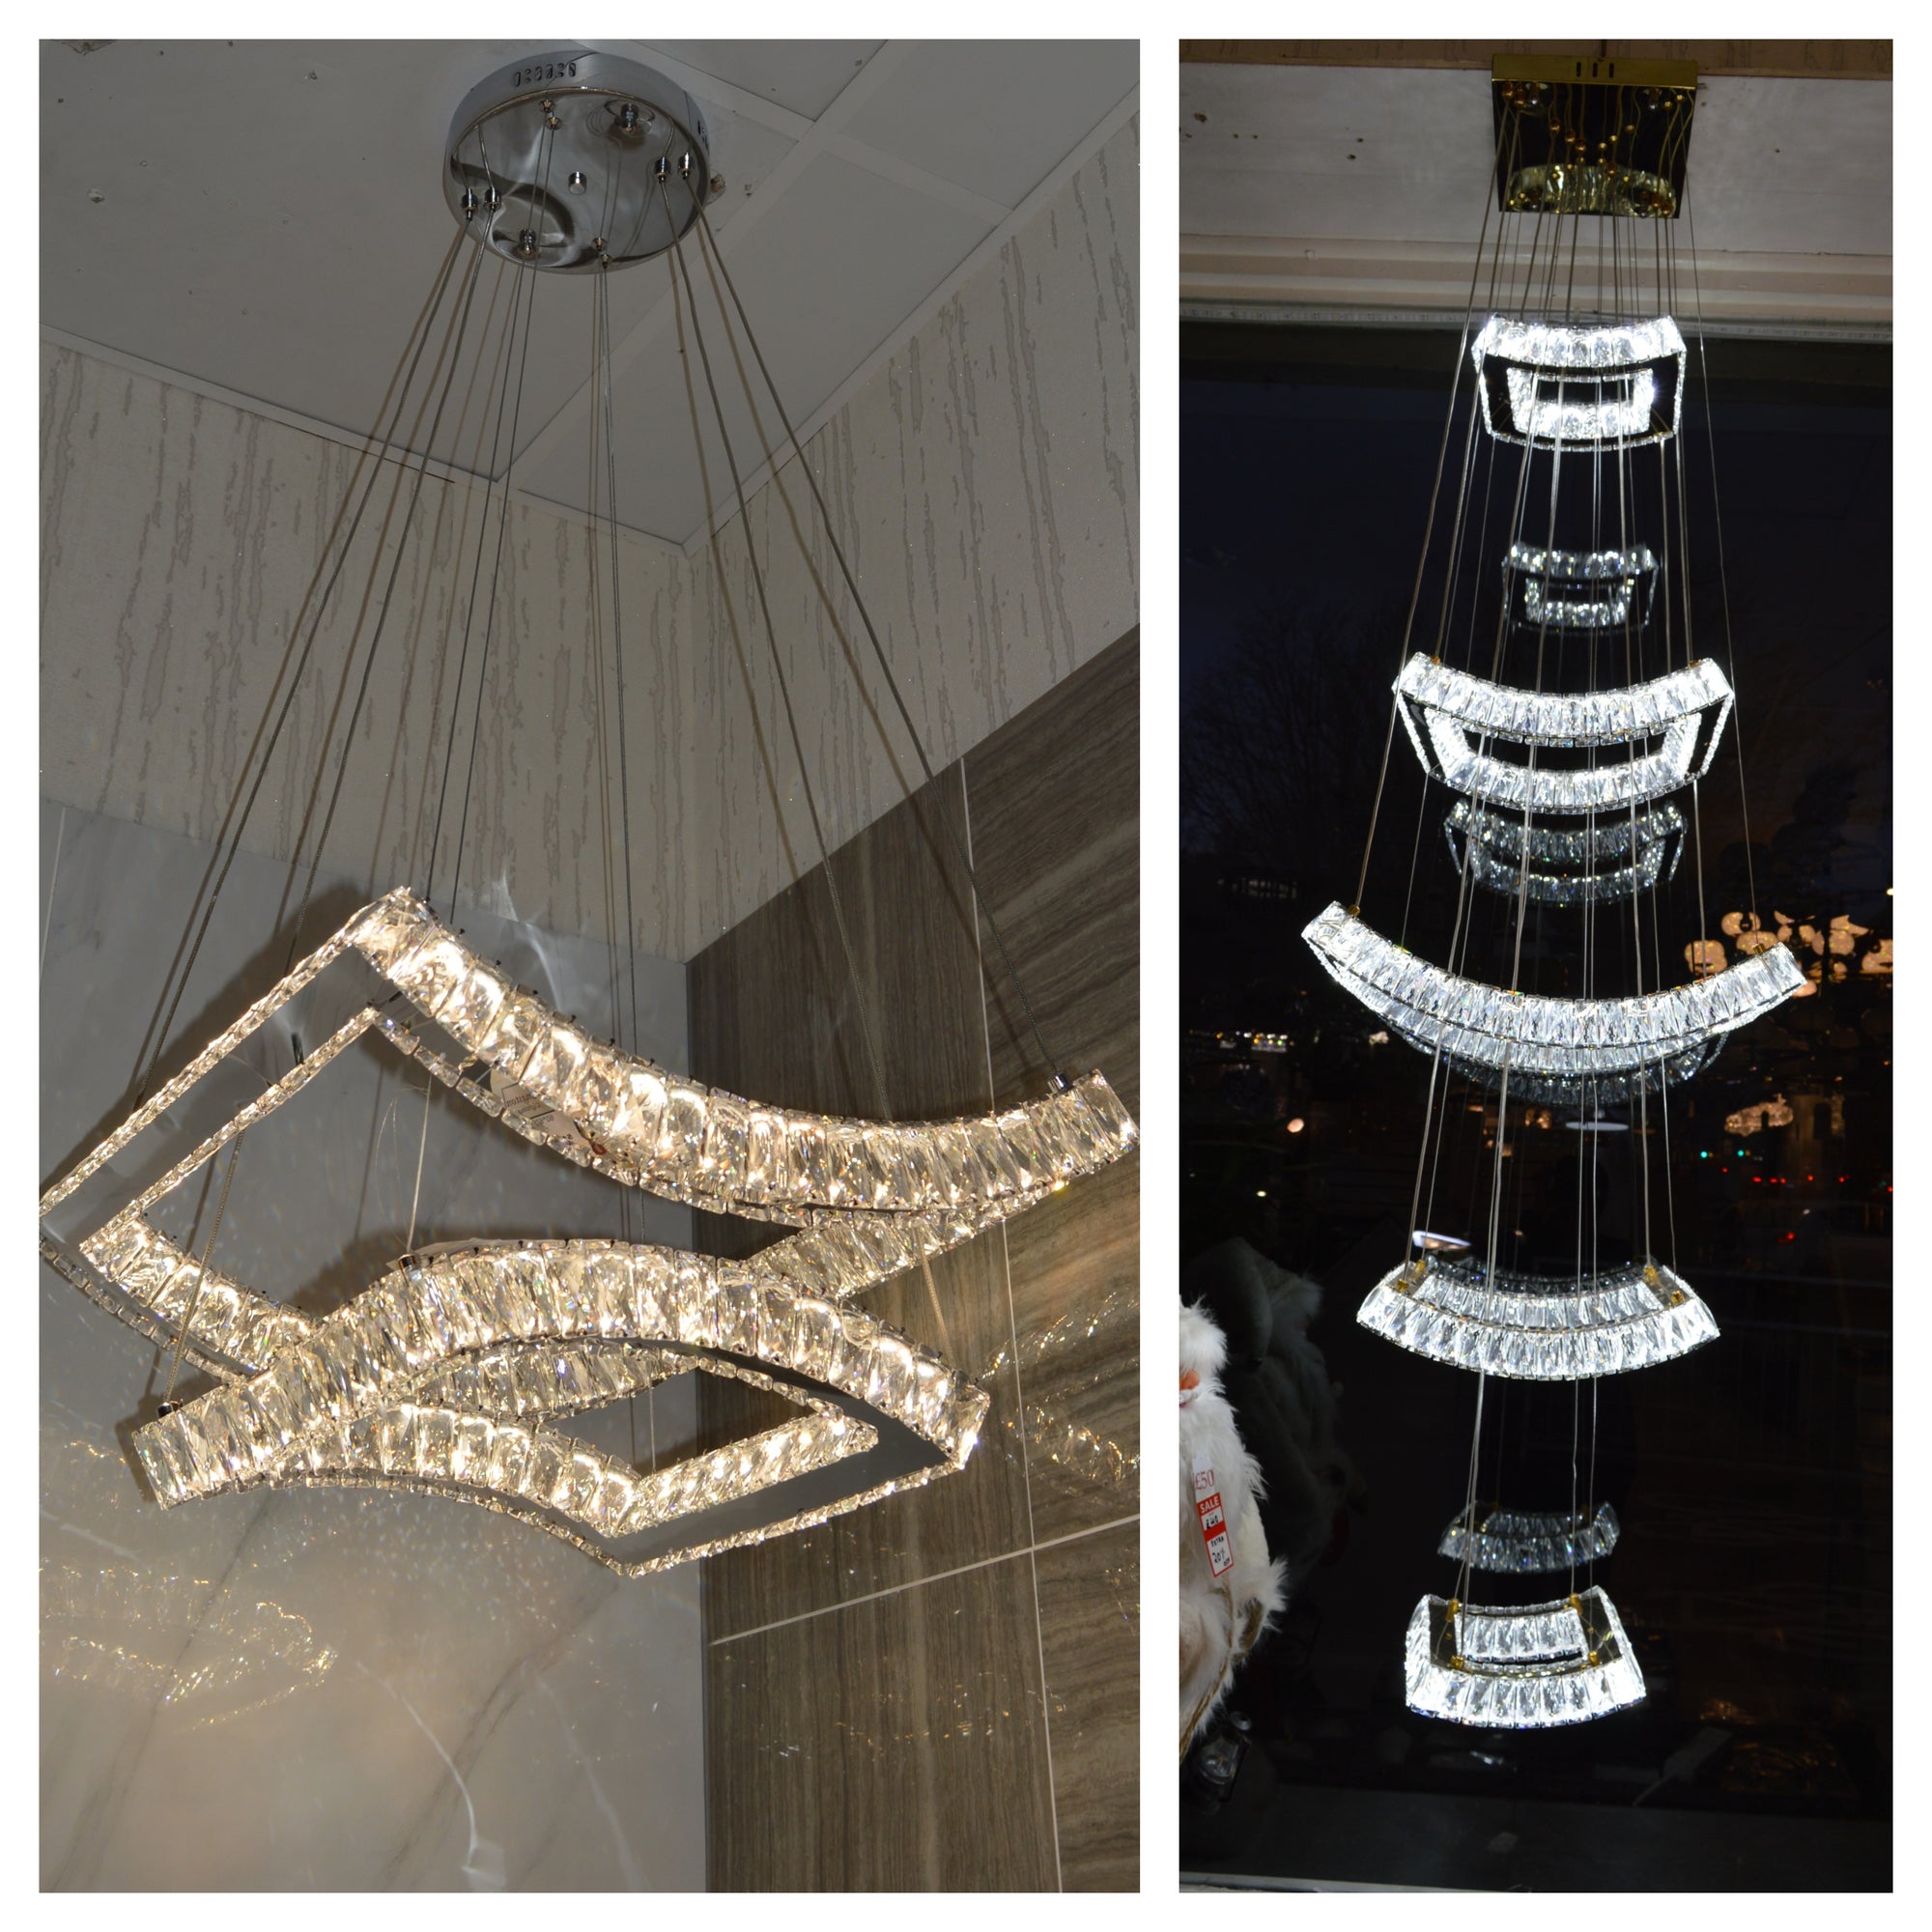 5 & 2 Layer Crystallic LED Chandeliers -Colour Changing Dimmable with Remote Control-5103-550 & 5103-550-5-Chrome & Gold